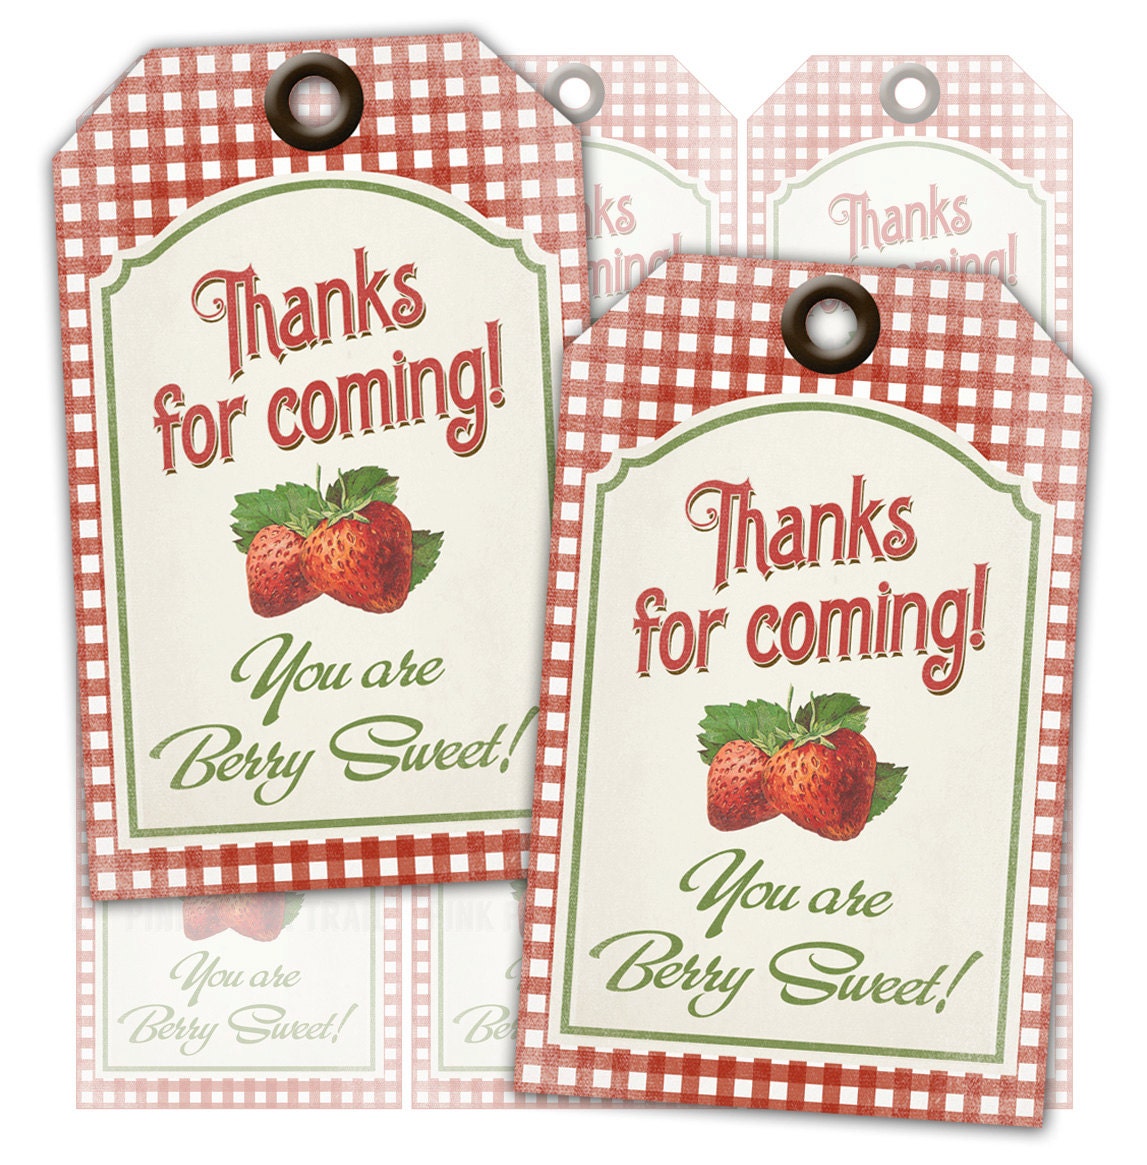 Strawberry Birthday Party Kit  Invitations, Cupcake Toppers, Thank You  Tags, Welcome Sign - Madi Loves Kiwi Digital Downloads